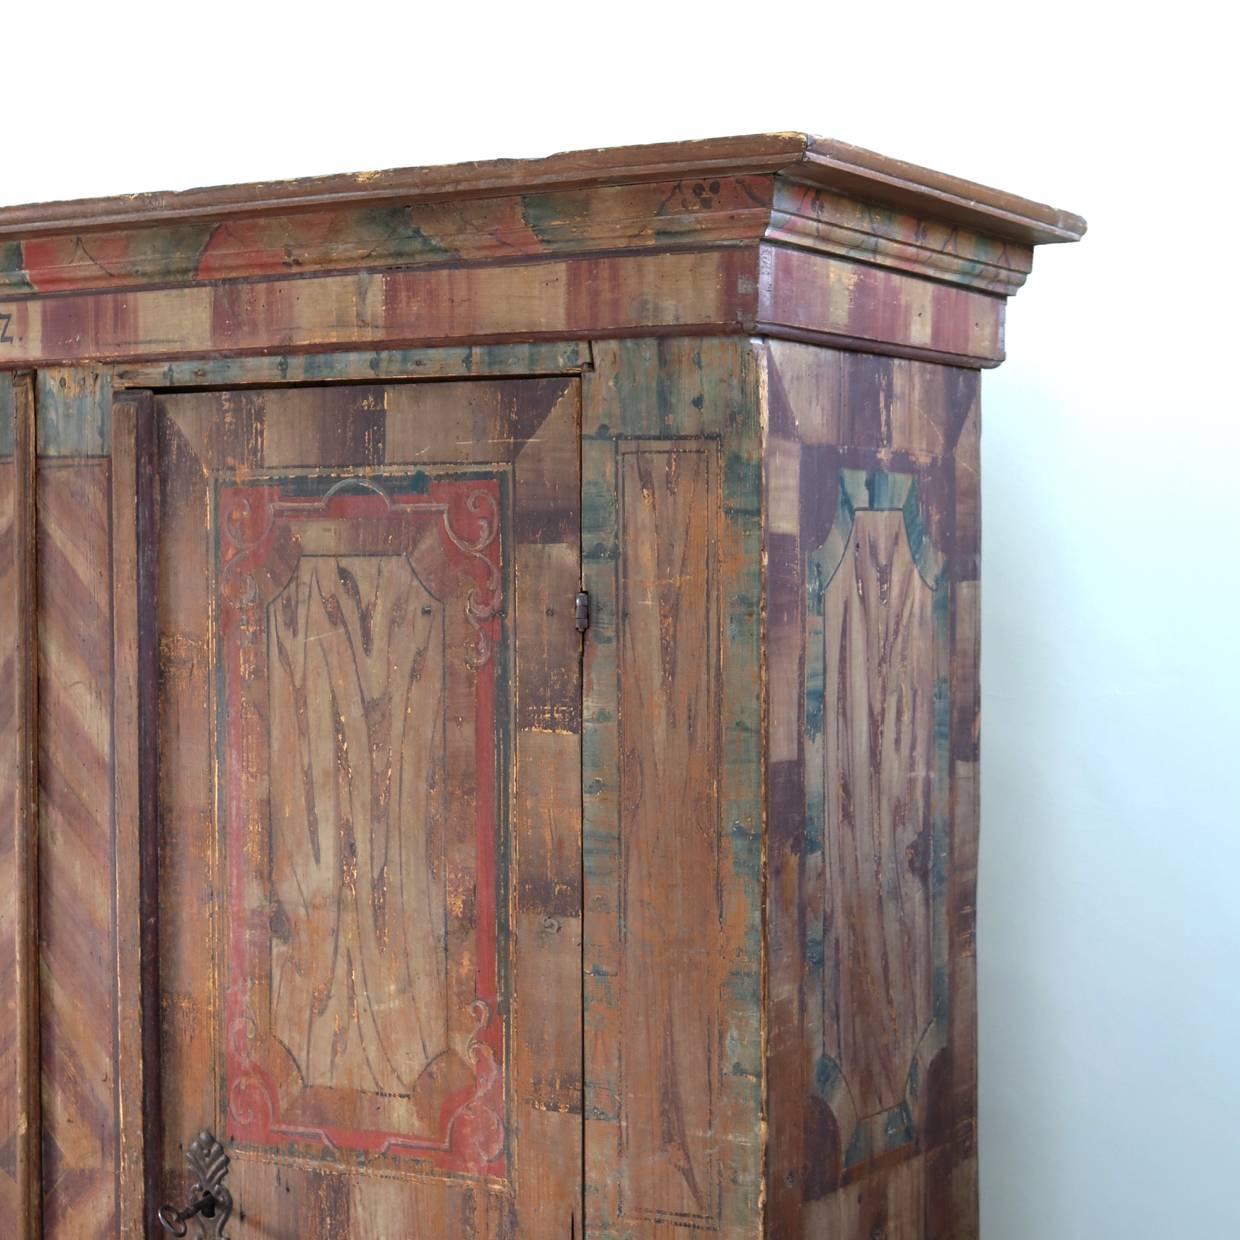 Charming, rustic two-door pine armoire with polychrome oche-toned decor, dated 1752. 